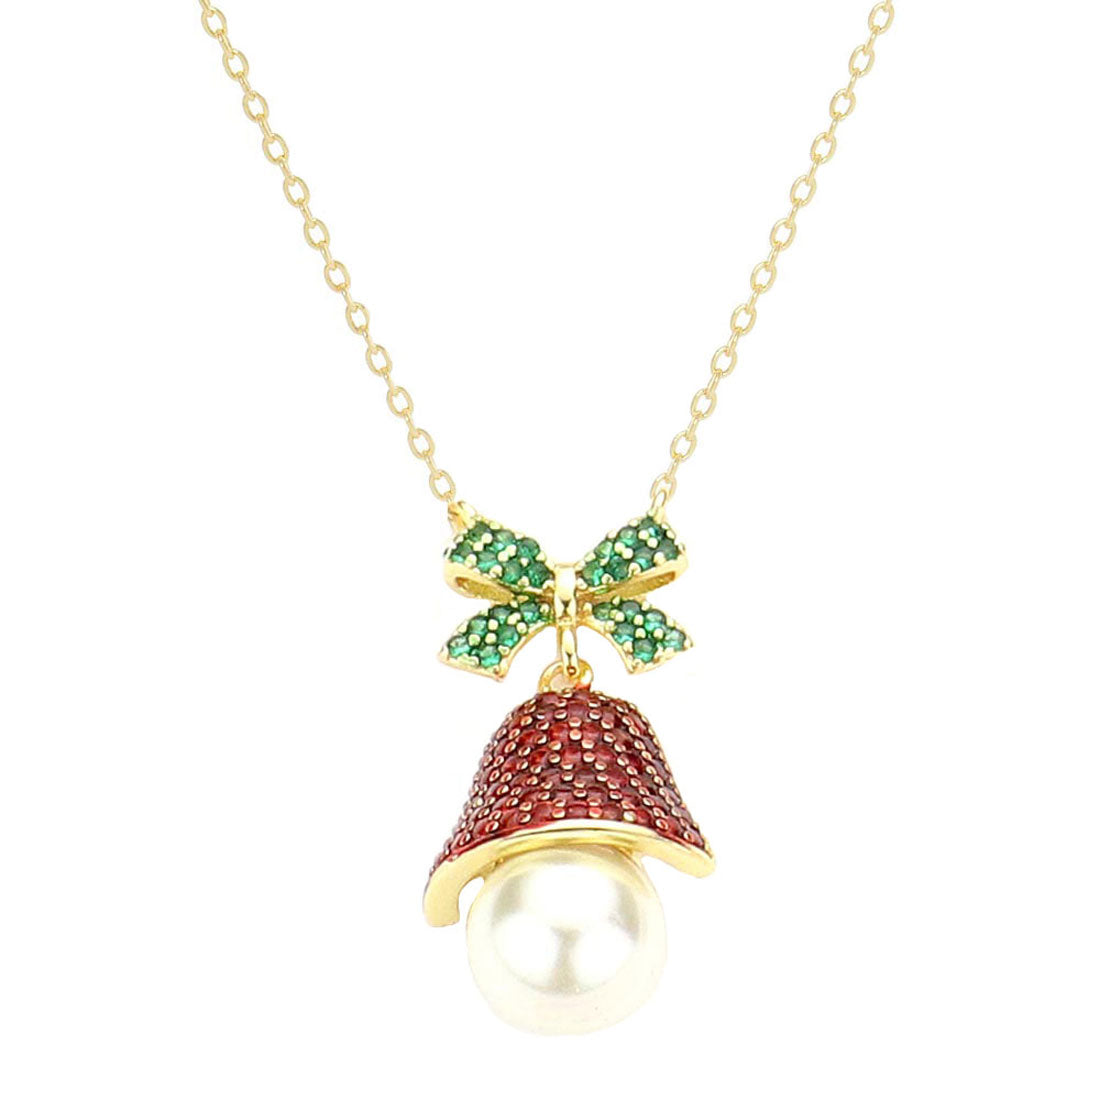 Gold Dipped Pearl CZ Jingle Bell Pendant Necklace, Get ready with these Pendant Necklace, put on a pop of color to complete your ensemble. Perfect for adding just the right amount of shimmer & shine and a touch of class to special events. Perfect Birthday Gift, Anniversary Gift, Mother's Day Gift, Graduation Gift.